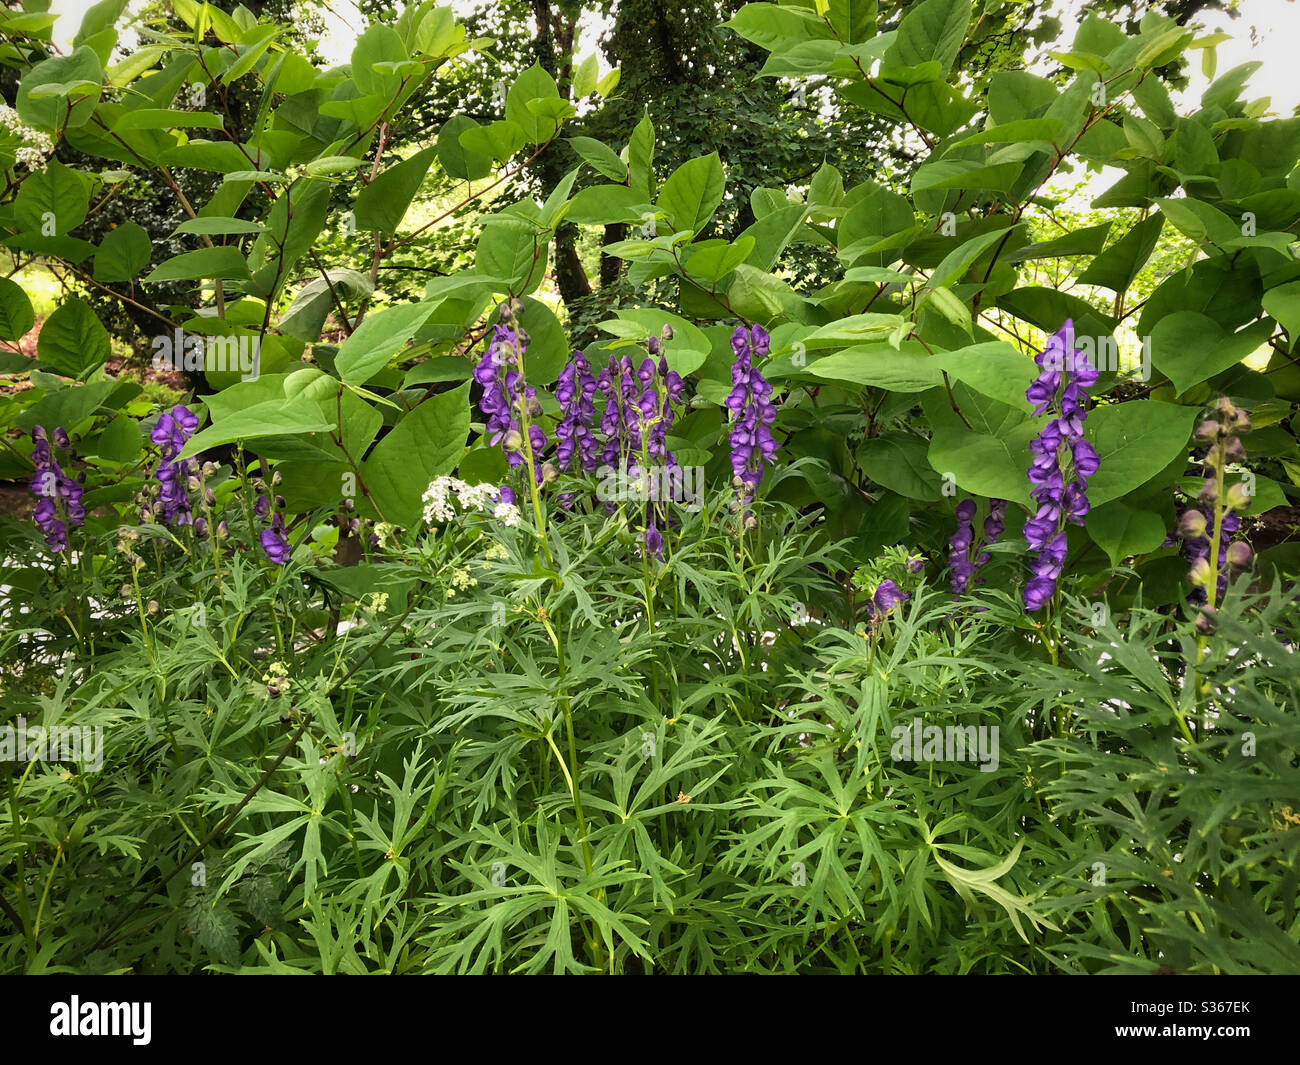 Monkshood plants (Aconitum variegatum) growing against a background of Japanese Knotweed (Reynoutria japonica) by the River Ely, South Wales, May. Stock Photo